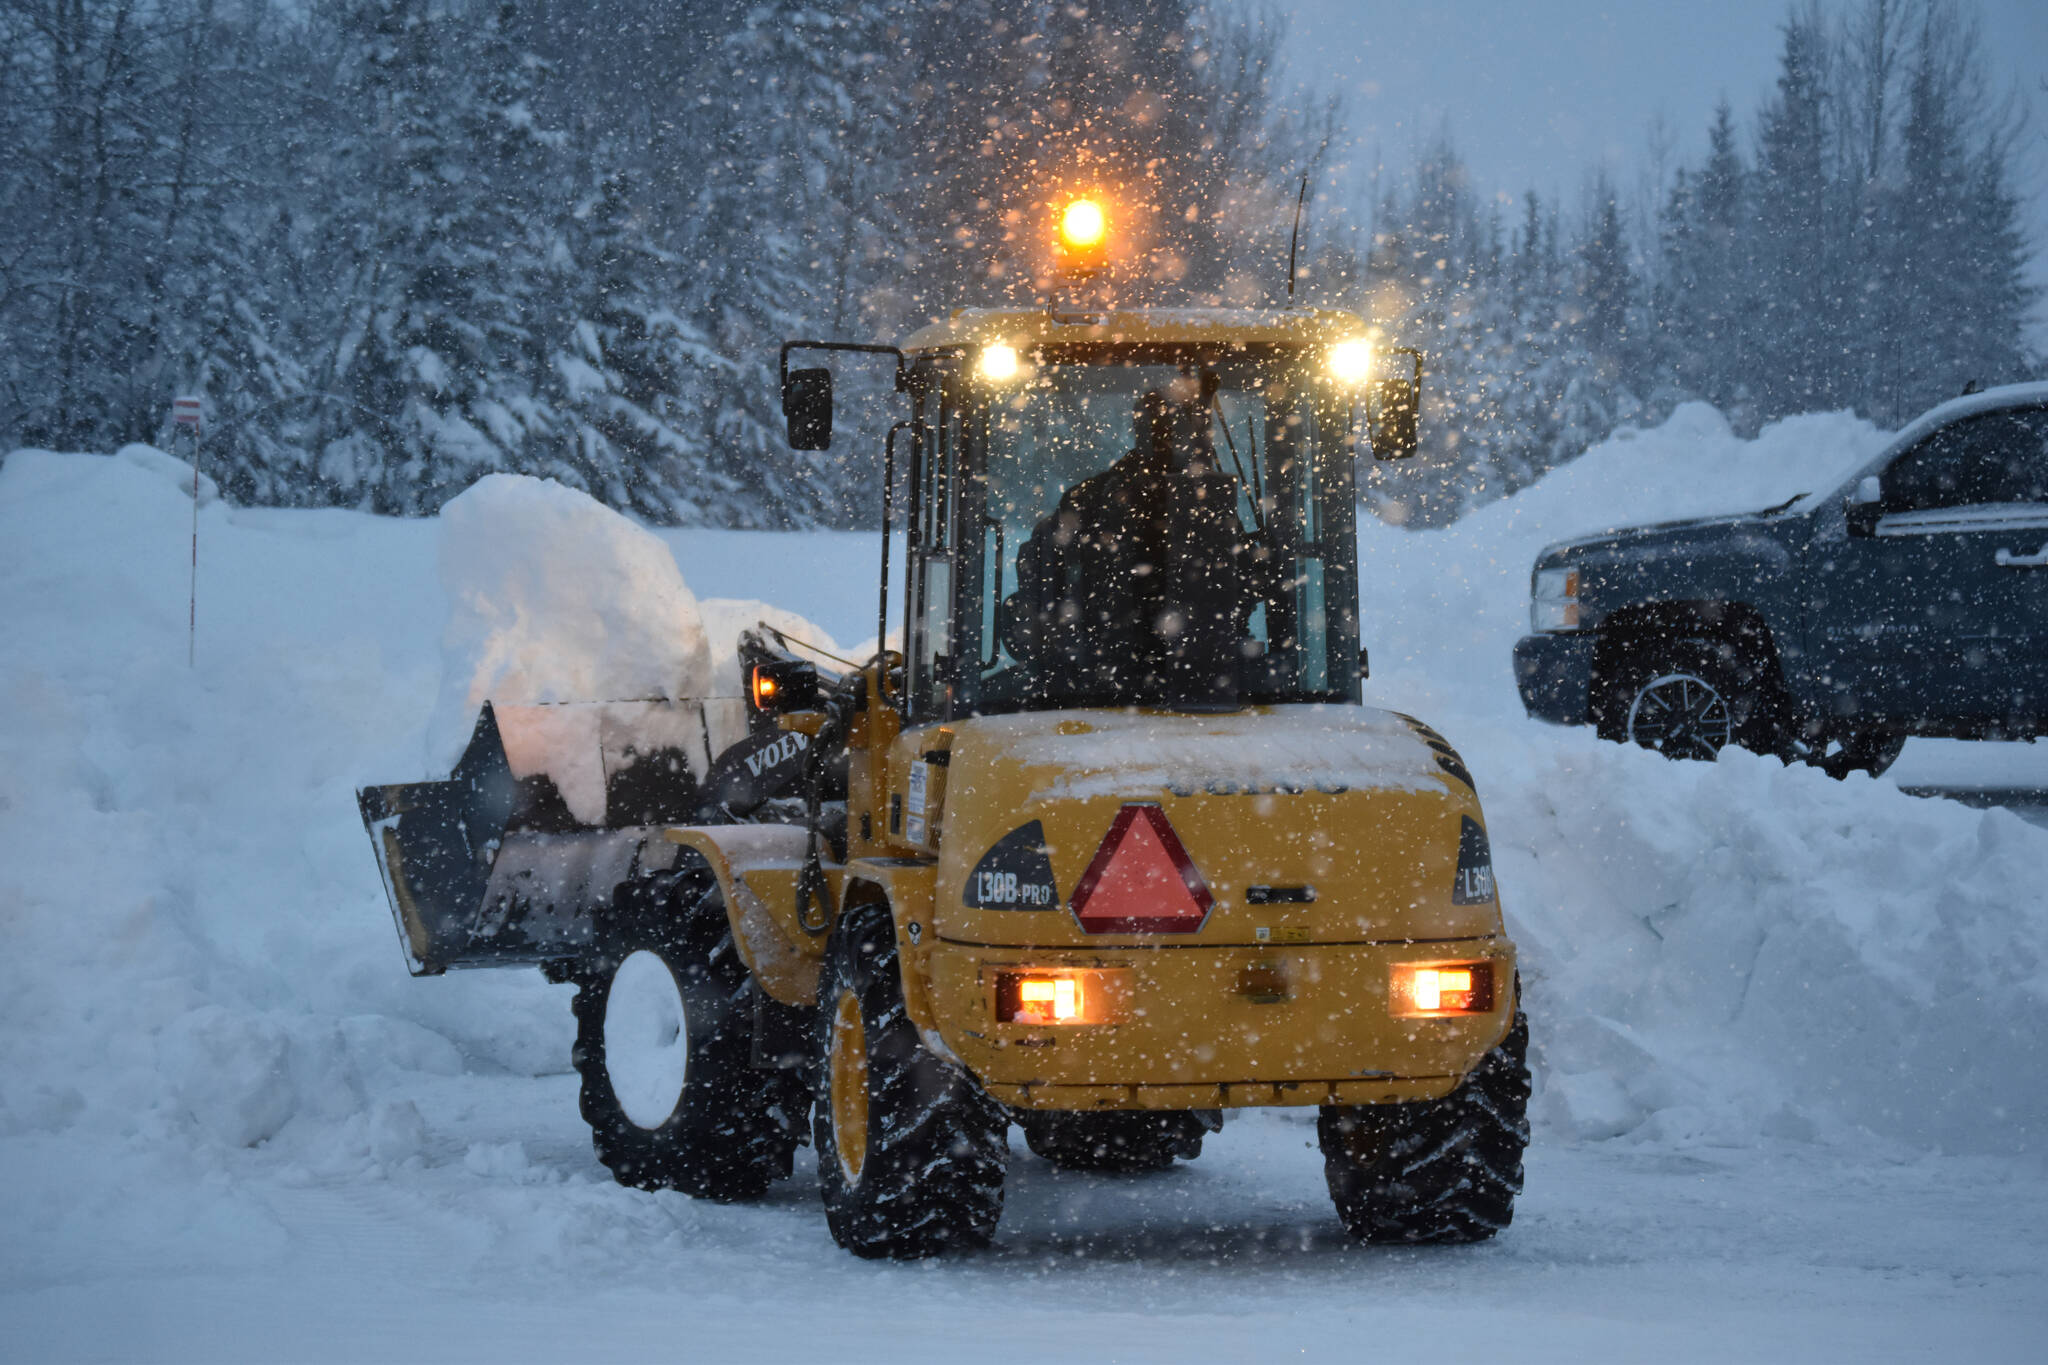 Snow is cleared from the road during the start of another major snowfall on Wednesday, Dec. 14, 2022, outside of the Peninsula Clarion offices in Kenai, Alaska. (Jake Dye/Peninsula Clarion)